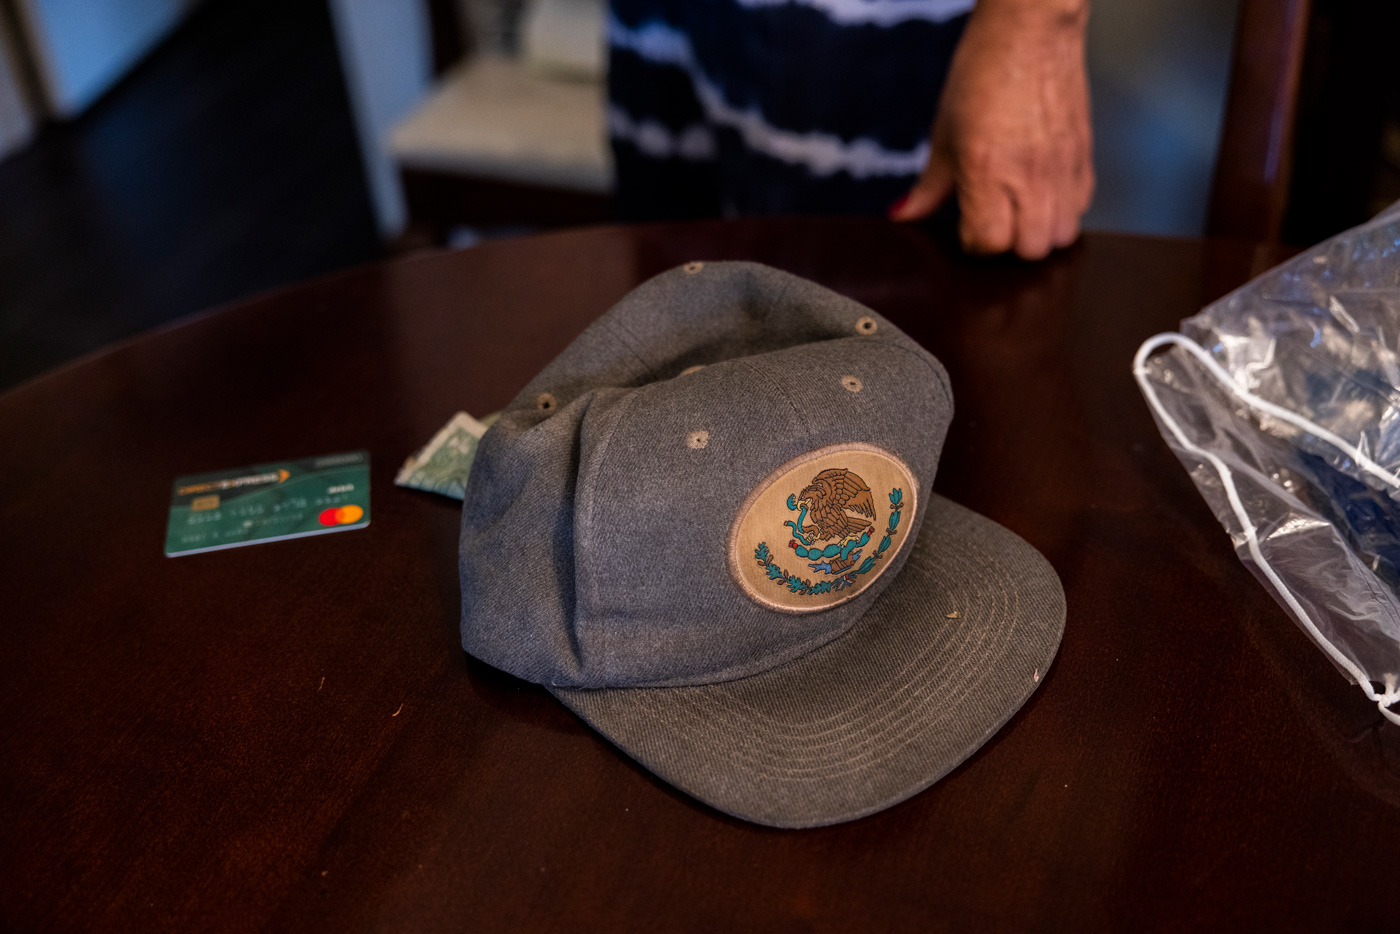 Rory Ward’s cap on the table of his mother Rowena Ward in Houston. Rory was killed in Harris County Jail in 2021 by fellow inmates.